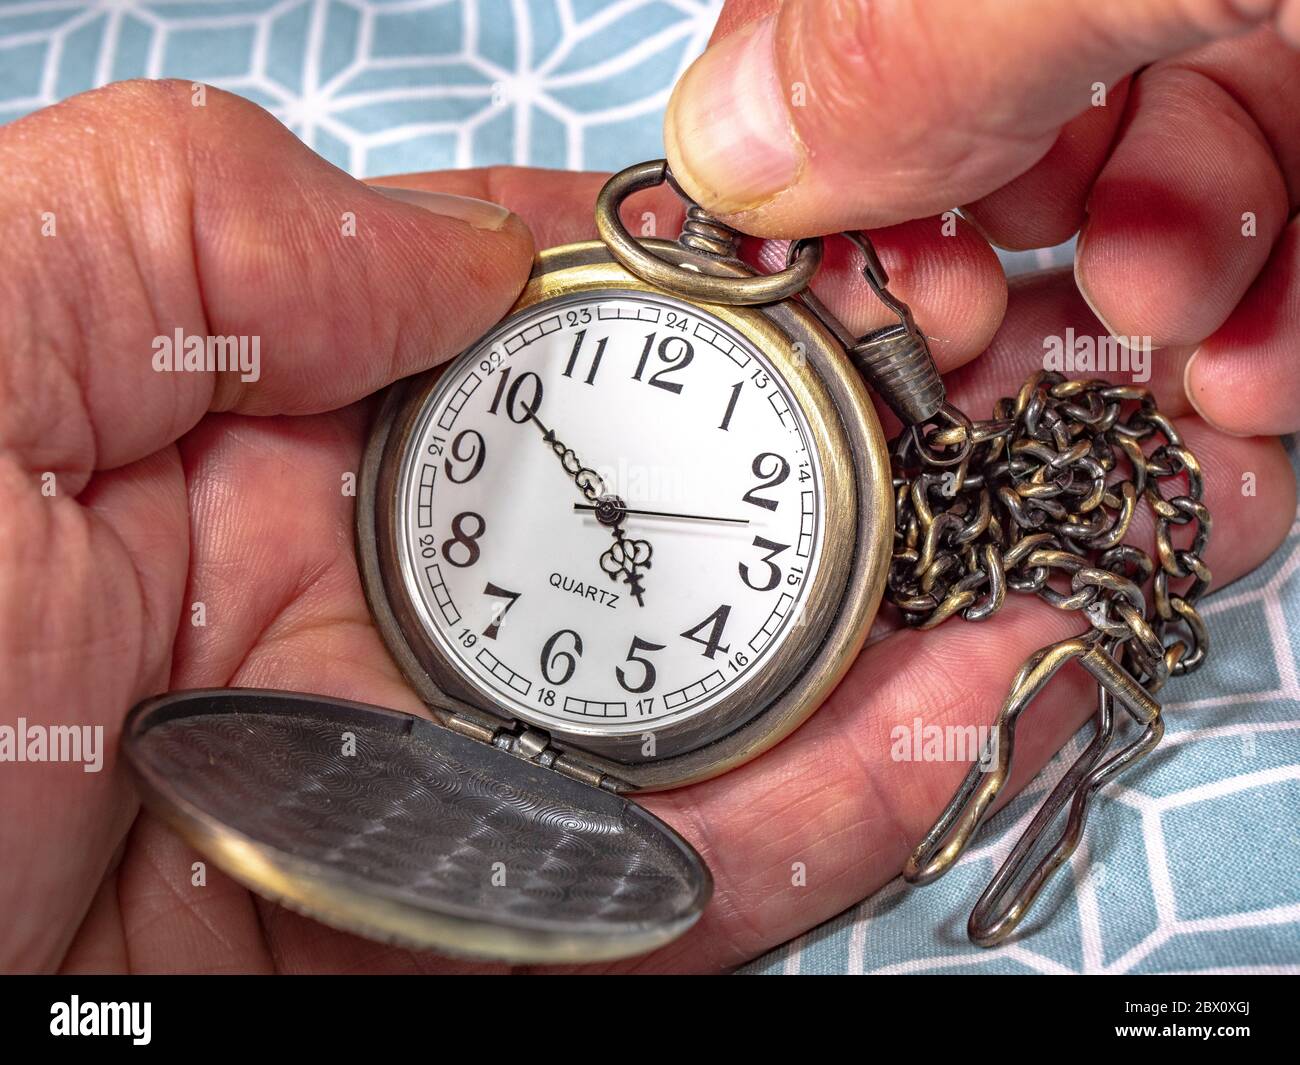 Close POV shot of a man’s hands setting the time on a quartz brass pocket watch with attached chain. Stock Photo